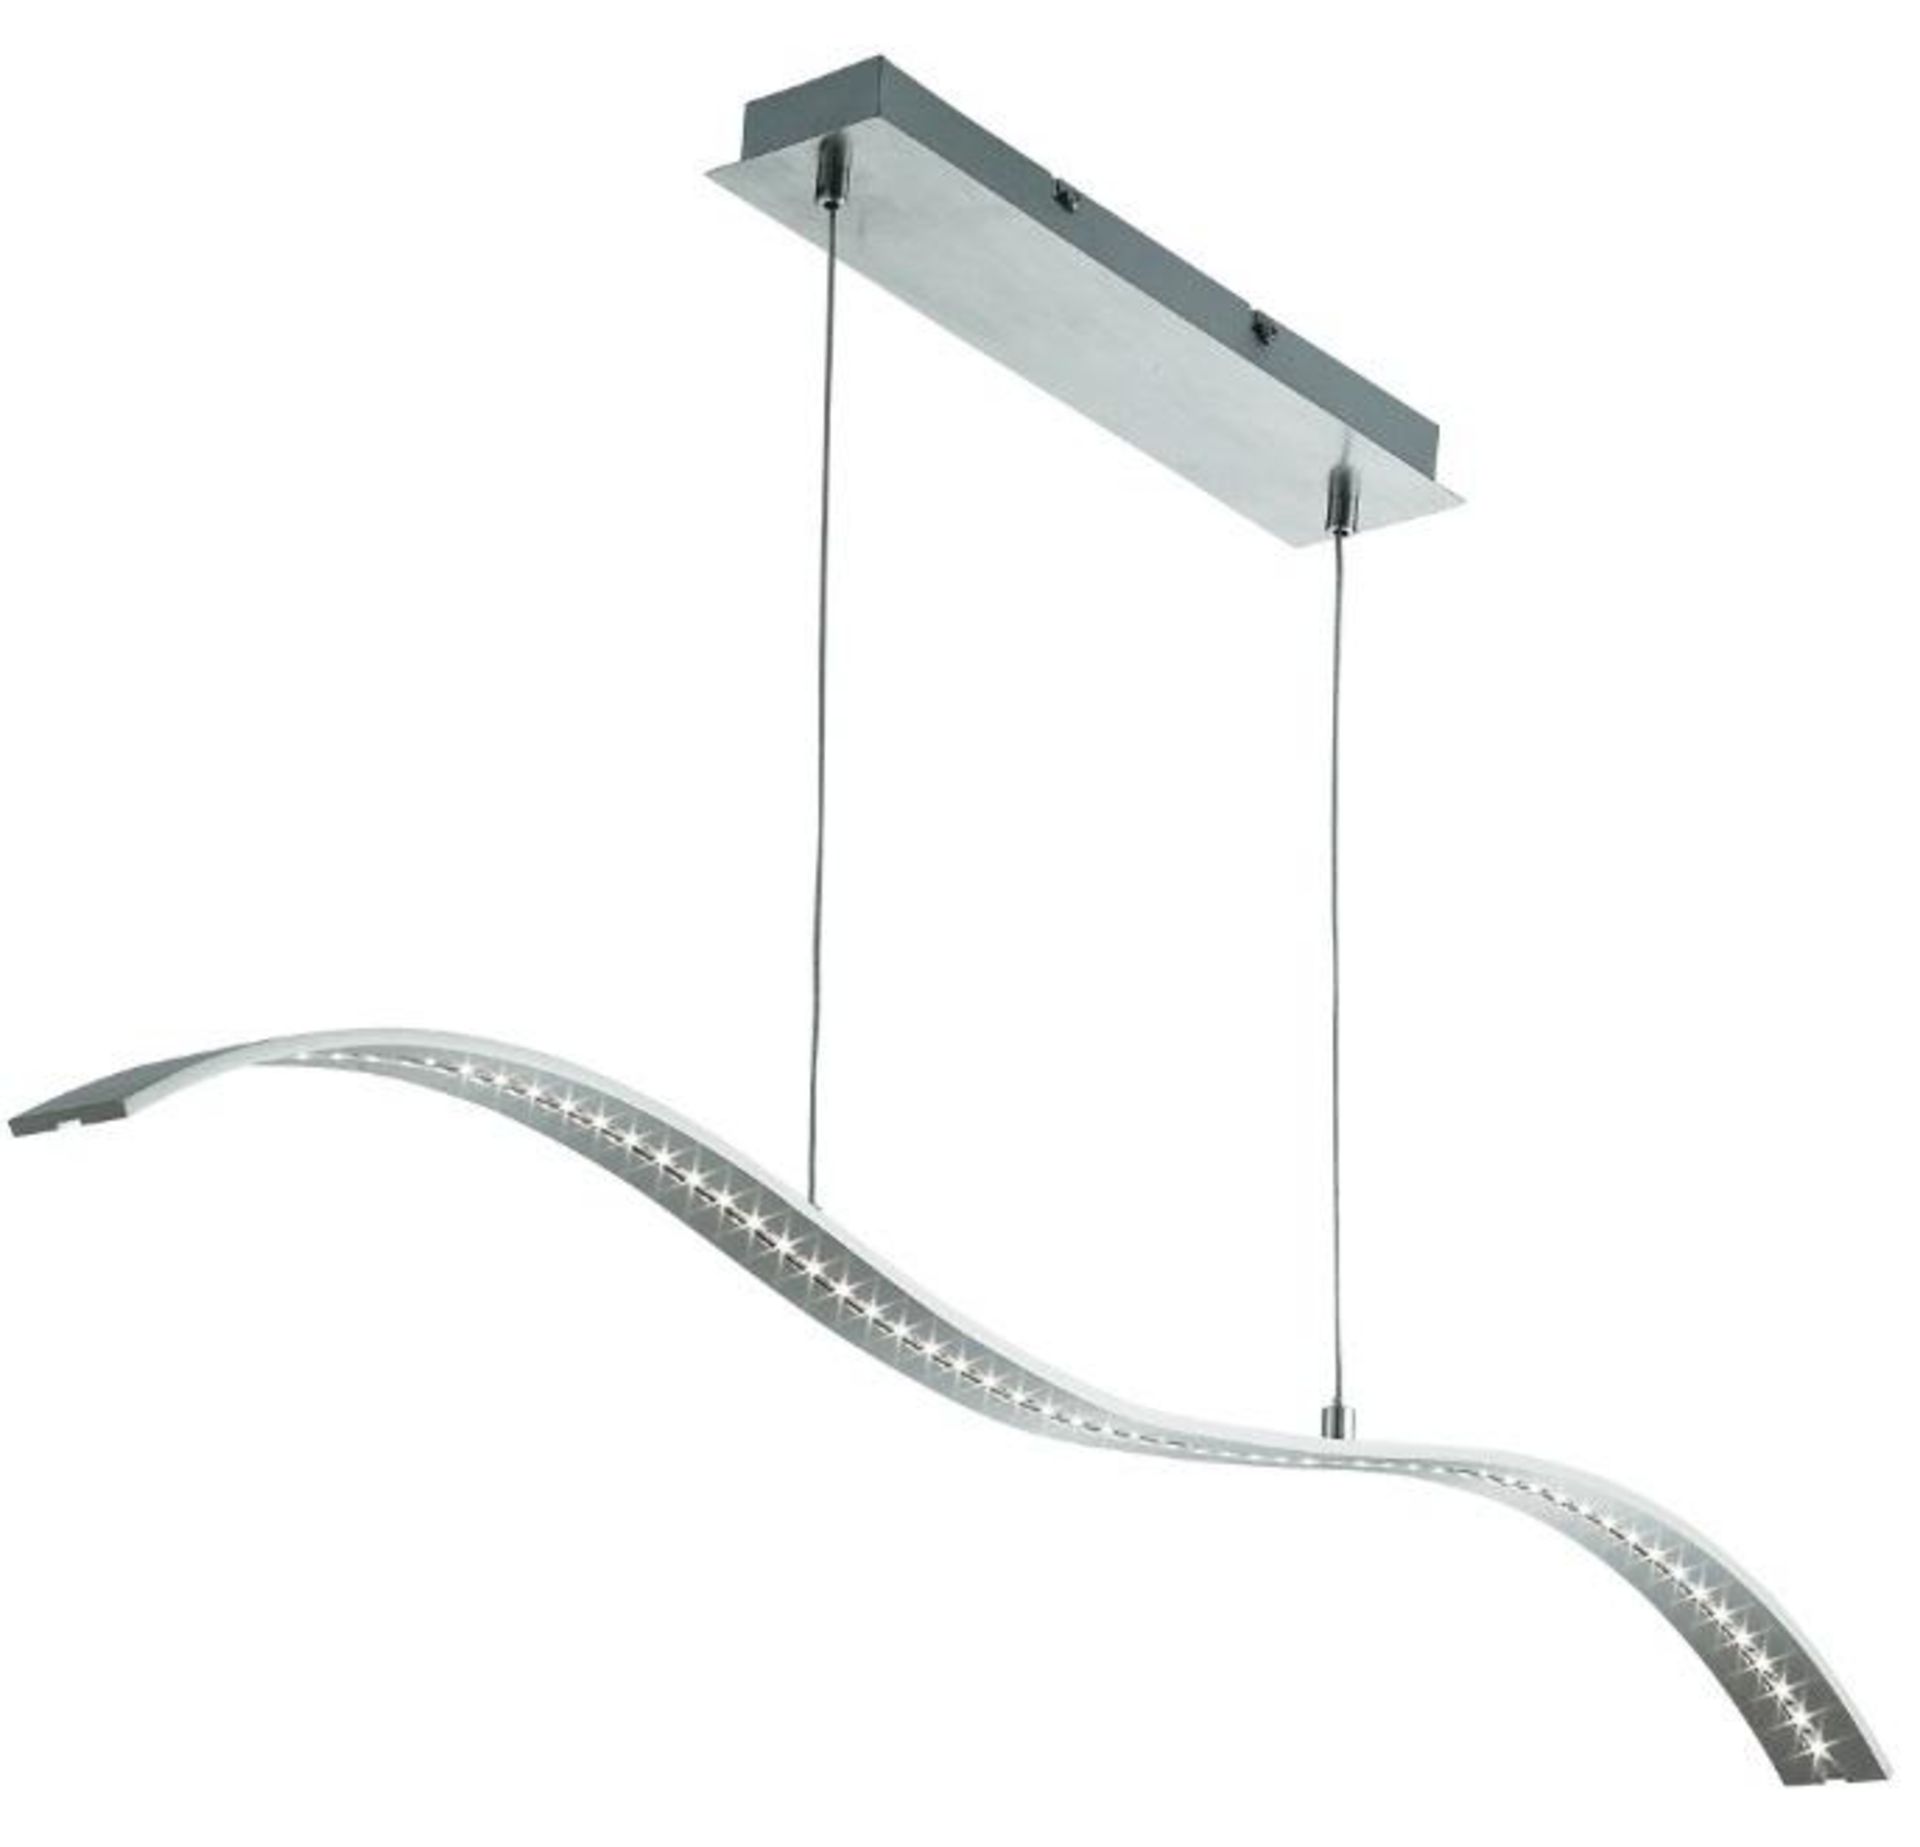 1 x Satin Silver LED Wavy Bar Light Fitting - New Boxed Stock - CL323 - Ref: 2076SS / PalF - Locatio